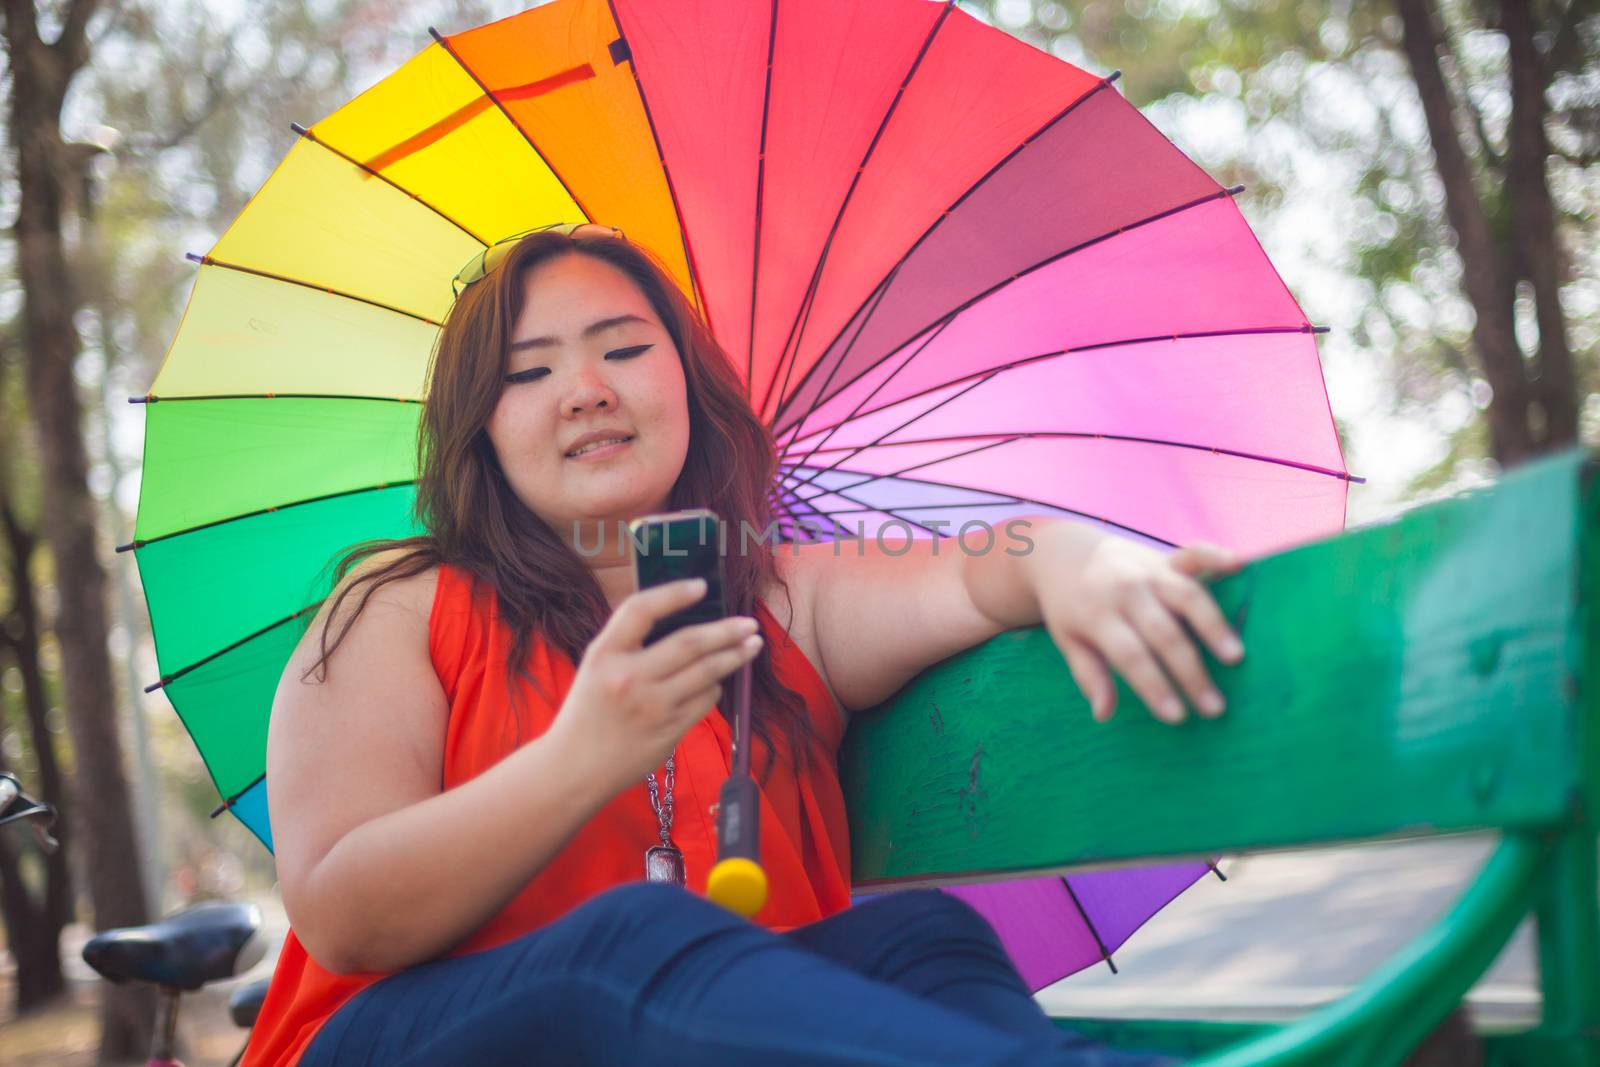 Happy fatty asian woman using mobile phone outdoor in a park